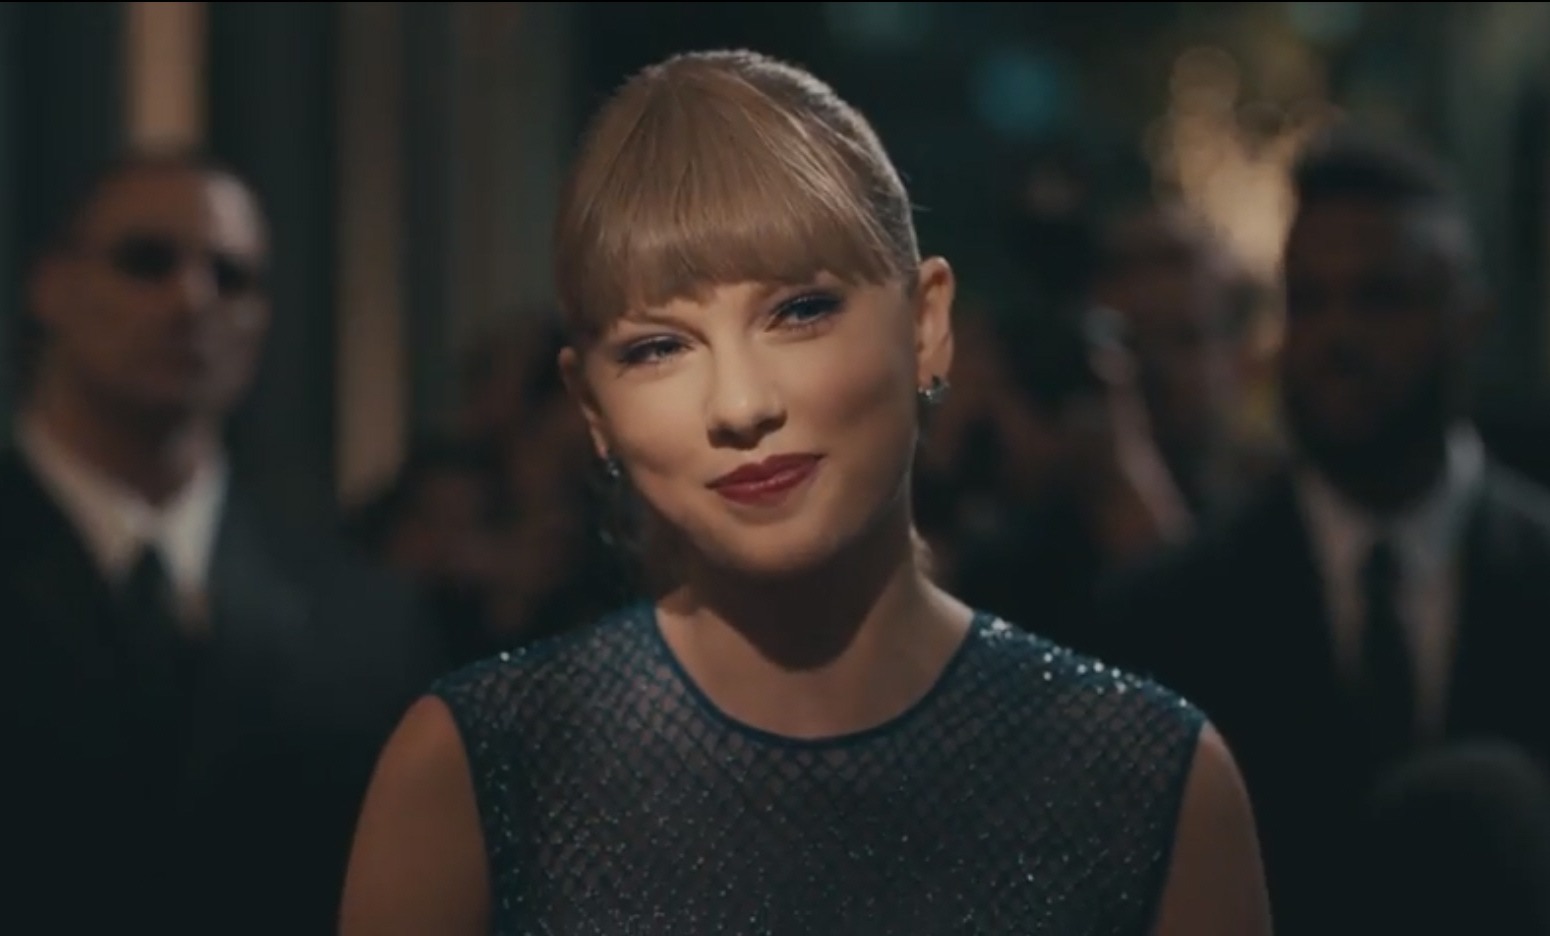 Taylor Swift premieres her new video 'Delicate' as seen on 'YouTube.'